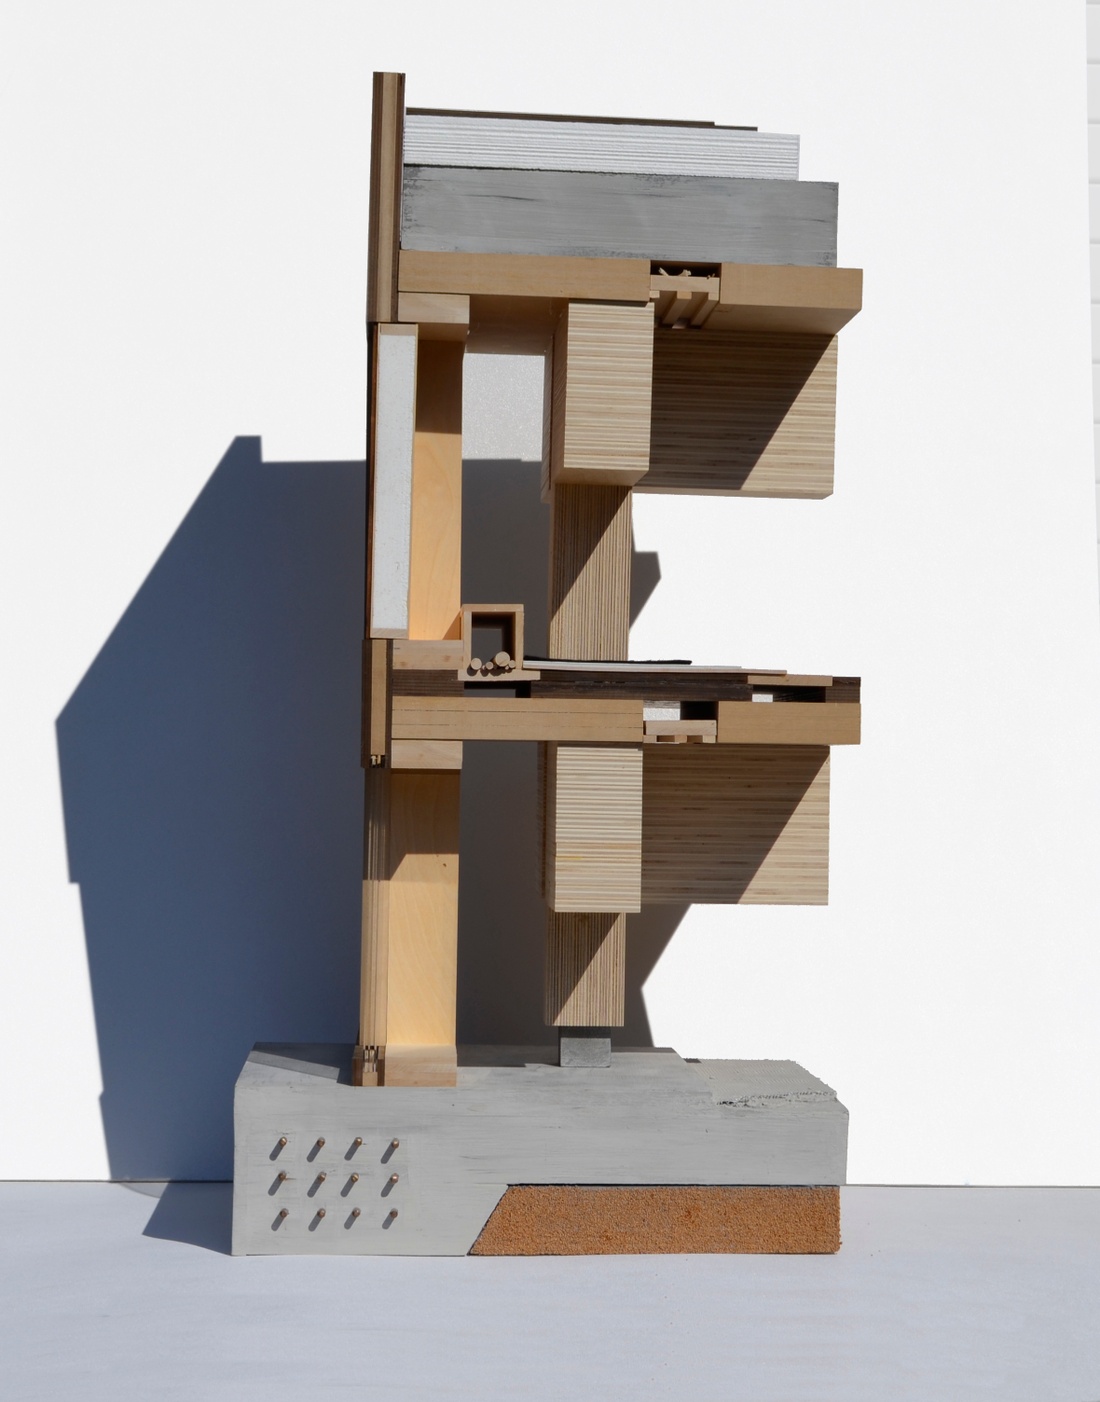 Detail model of the Wood Innovation and Design Center.